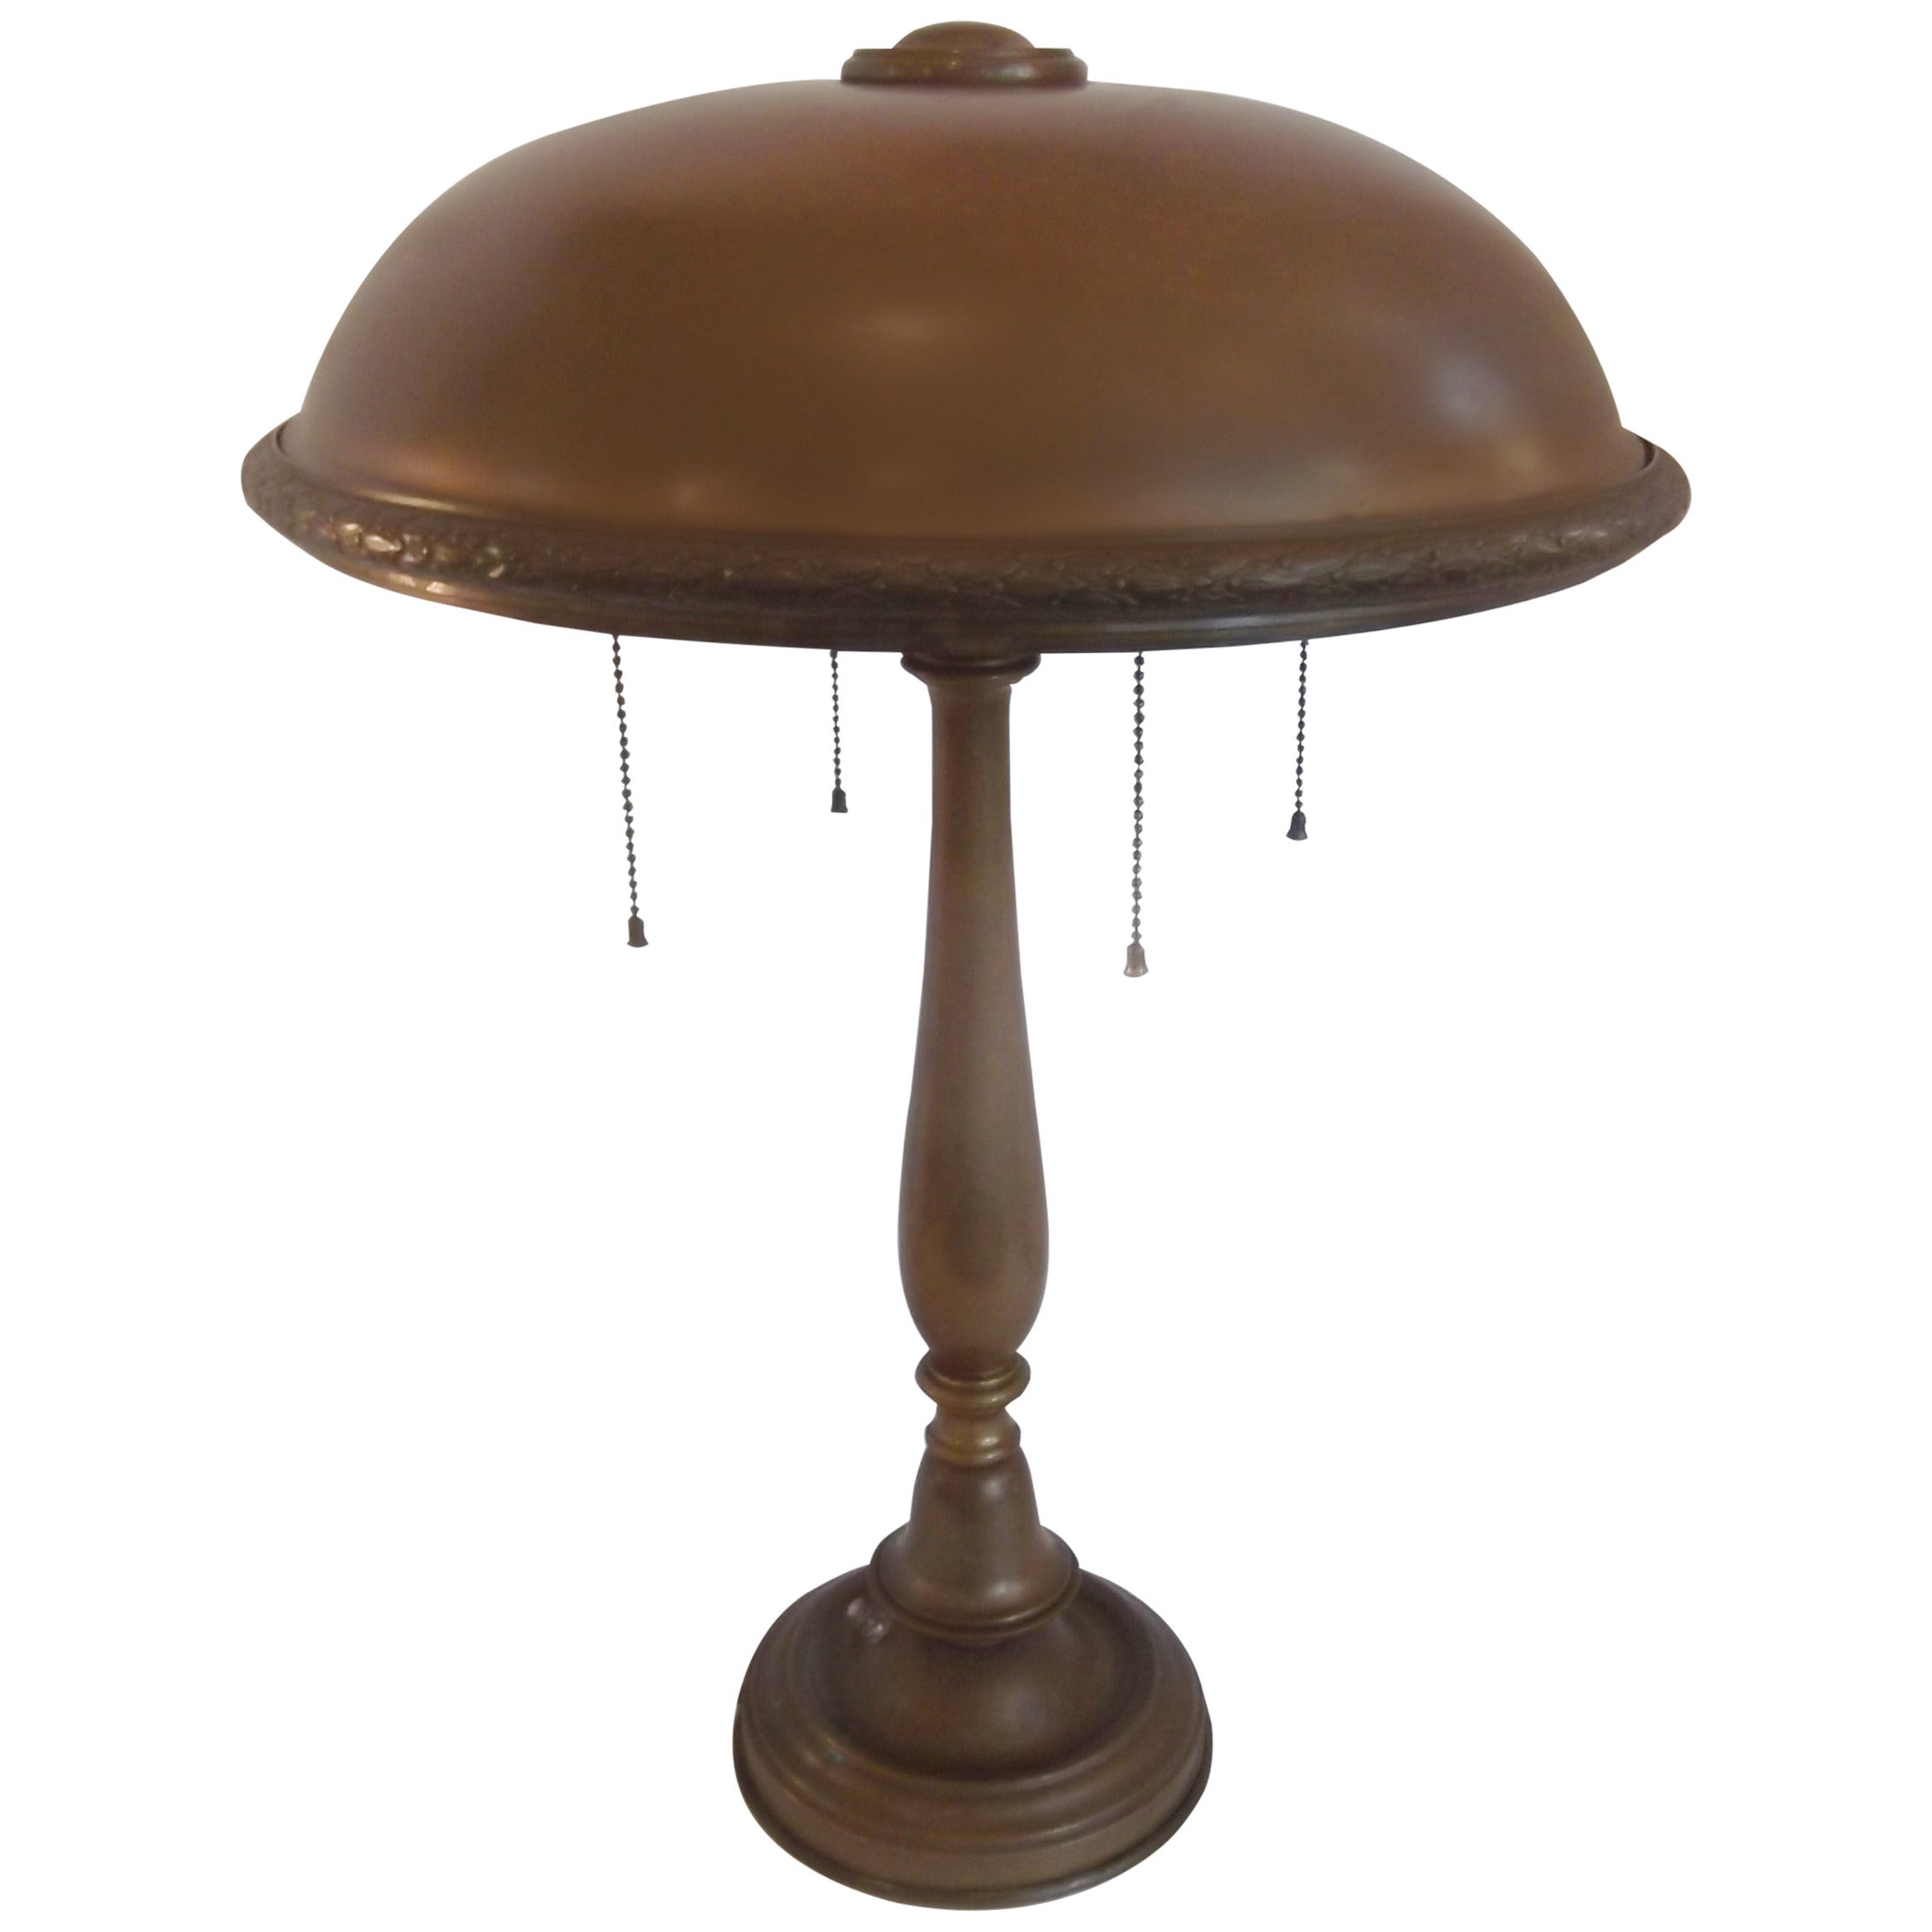 Solid Brass Table Lamp, circa 1900-1910